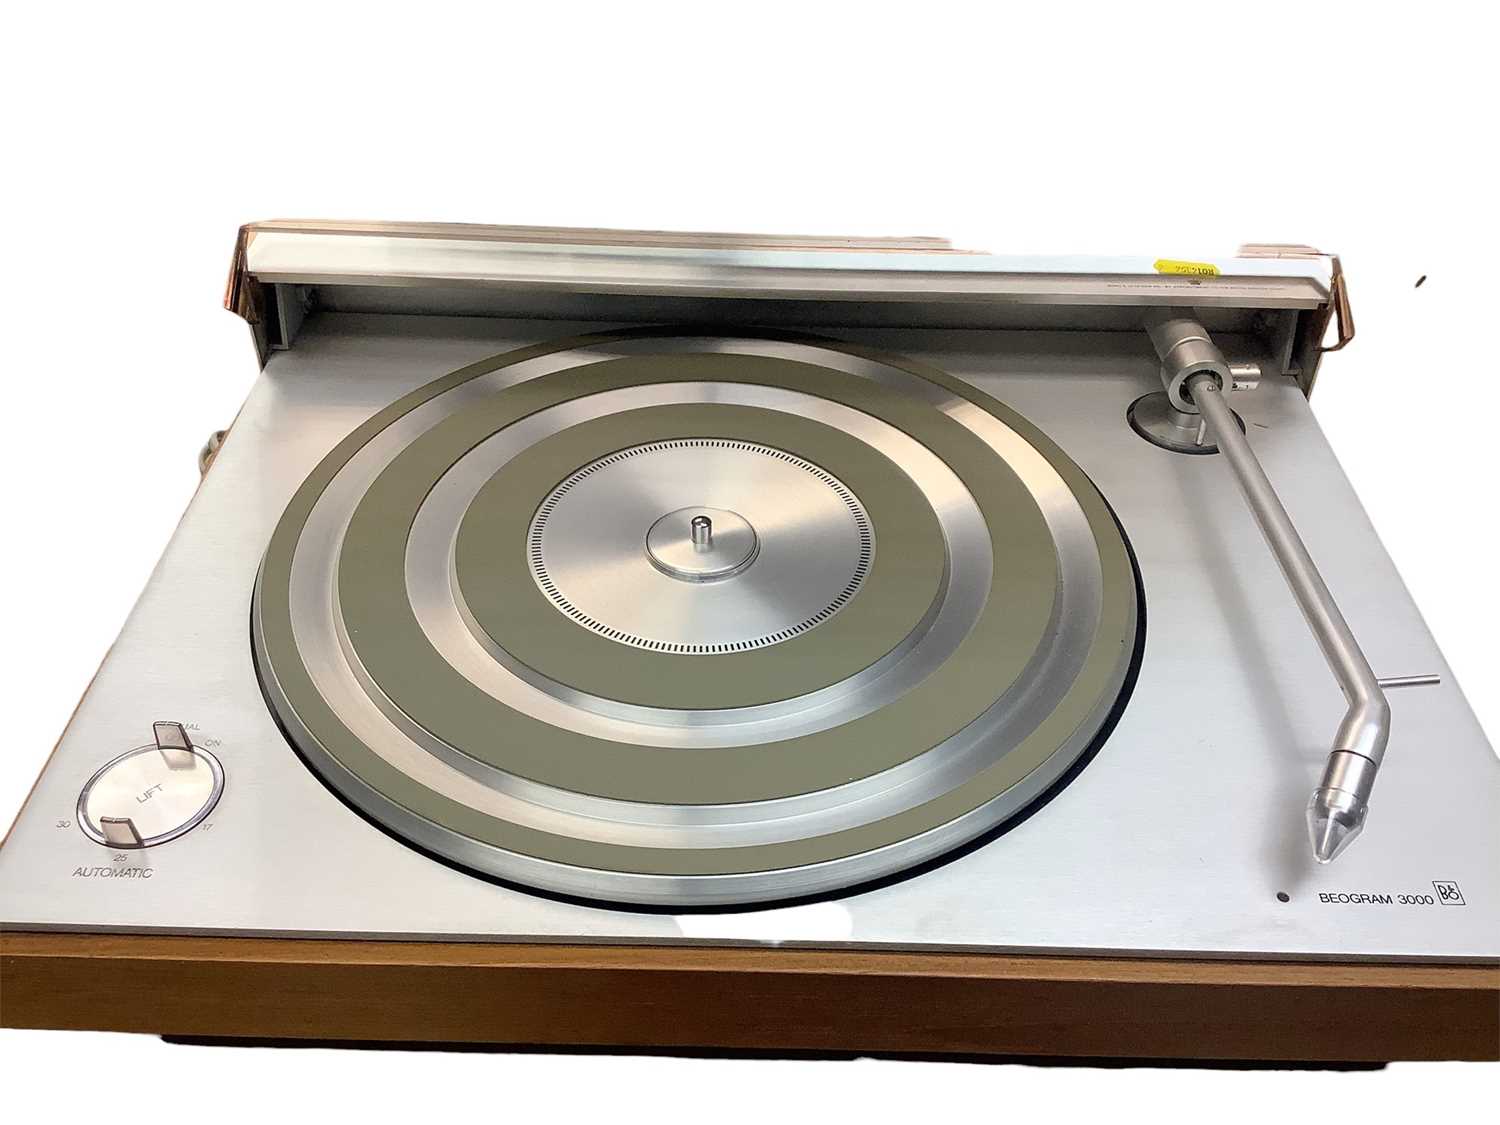 Bang & Olufsen Beogram 3000 record player - Image 2 of 2